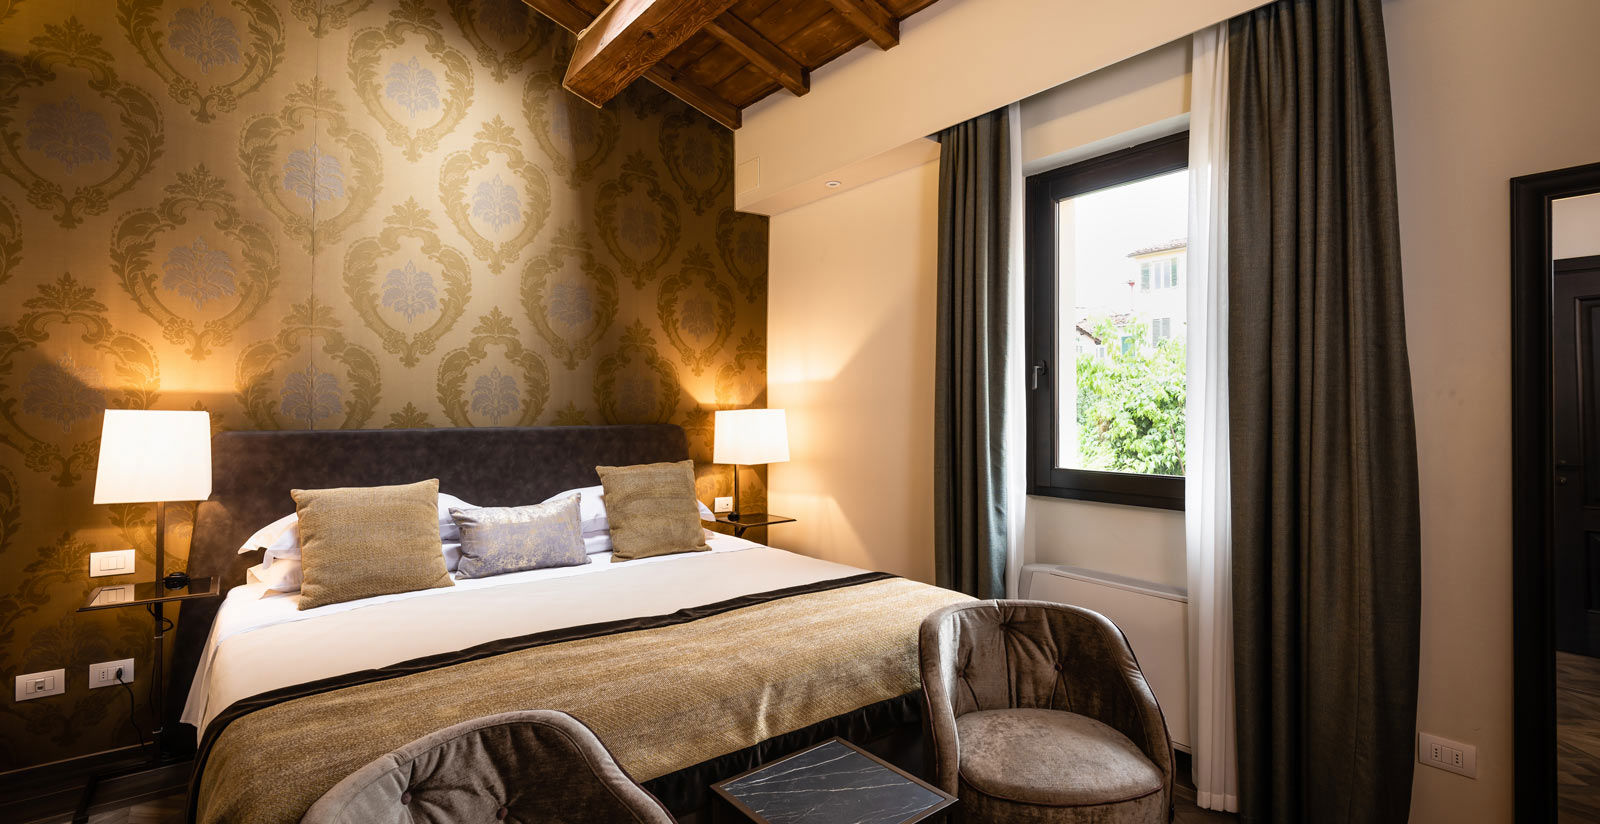 Corte Guelfa - Rooms close to the Central Market in Florence 4